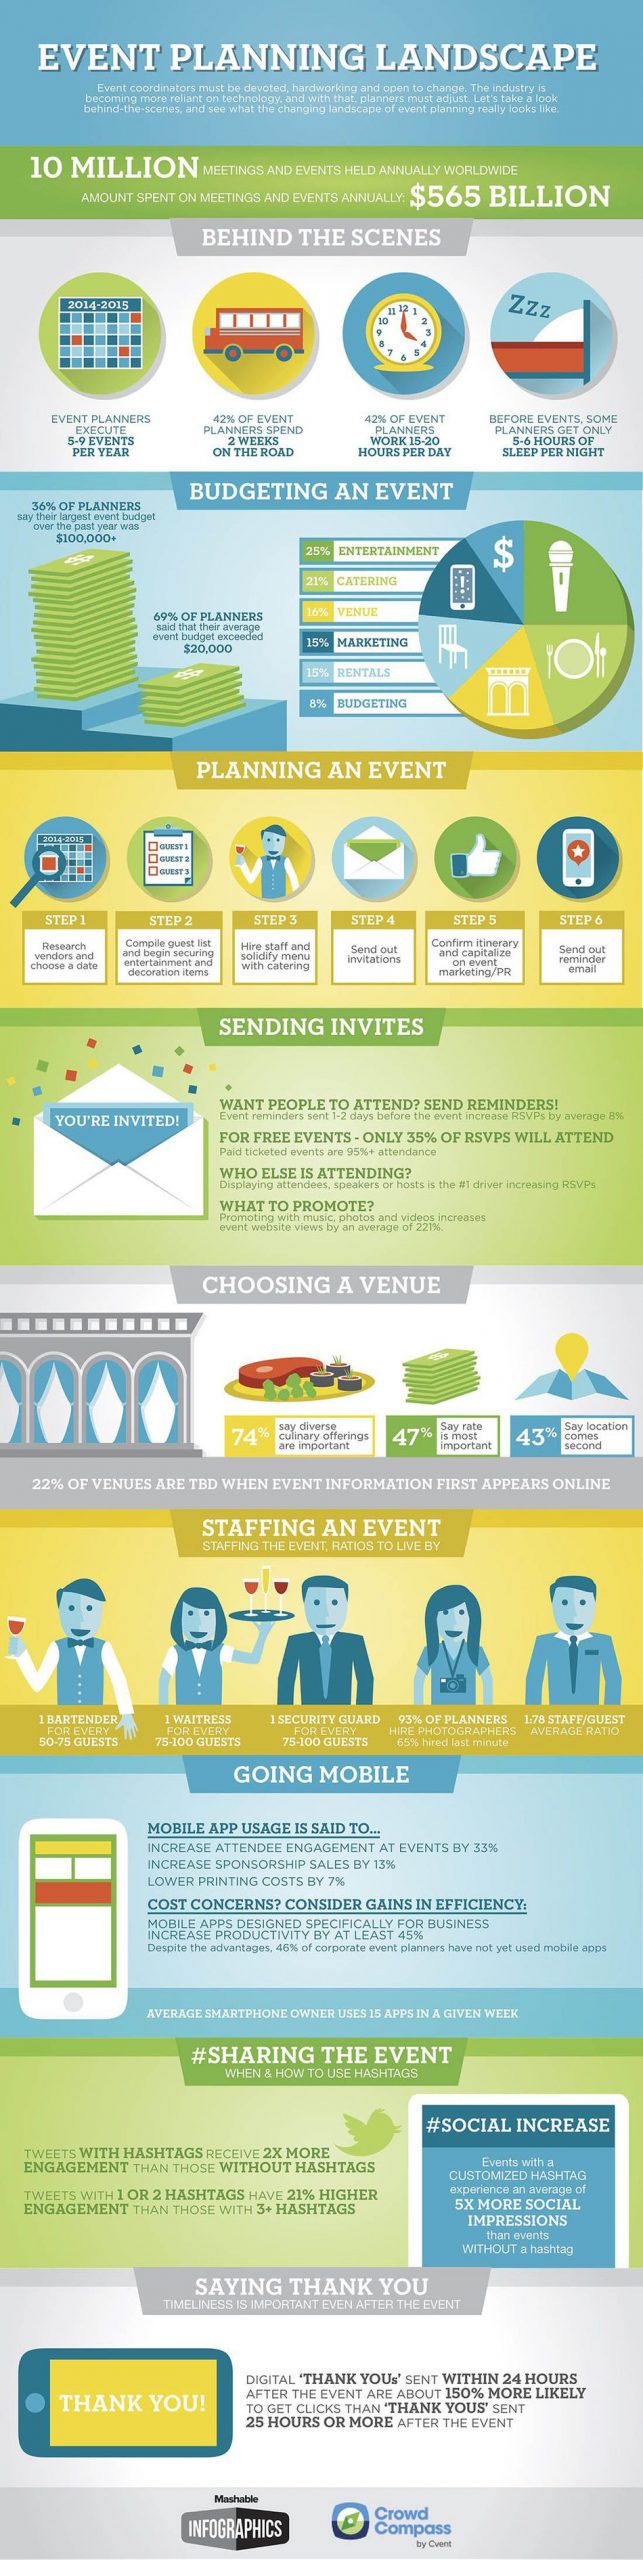 ultimate event planning cheat sheet